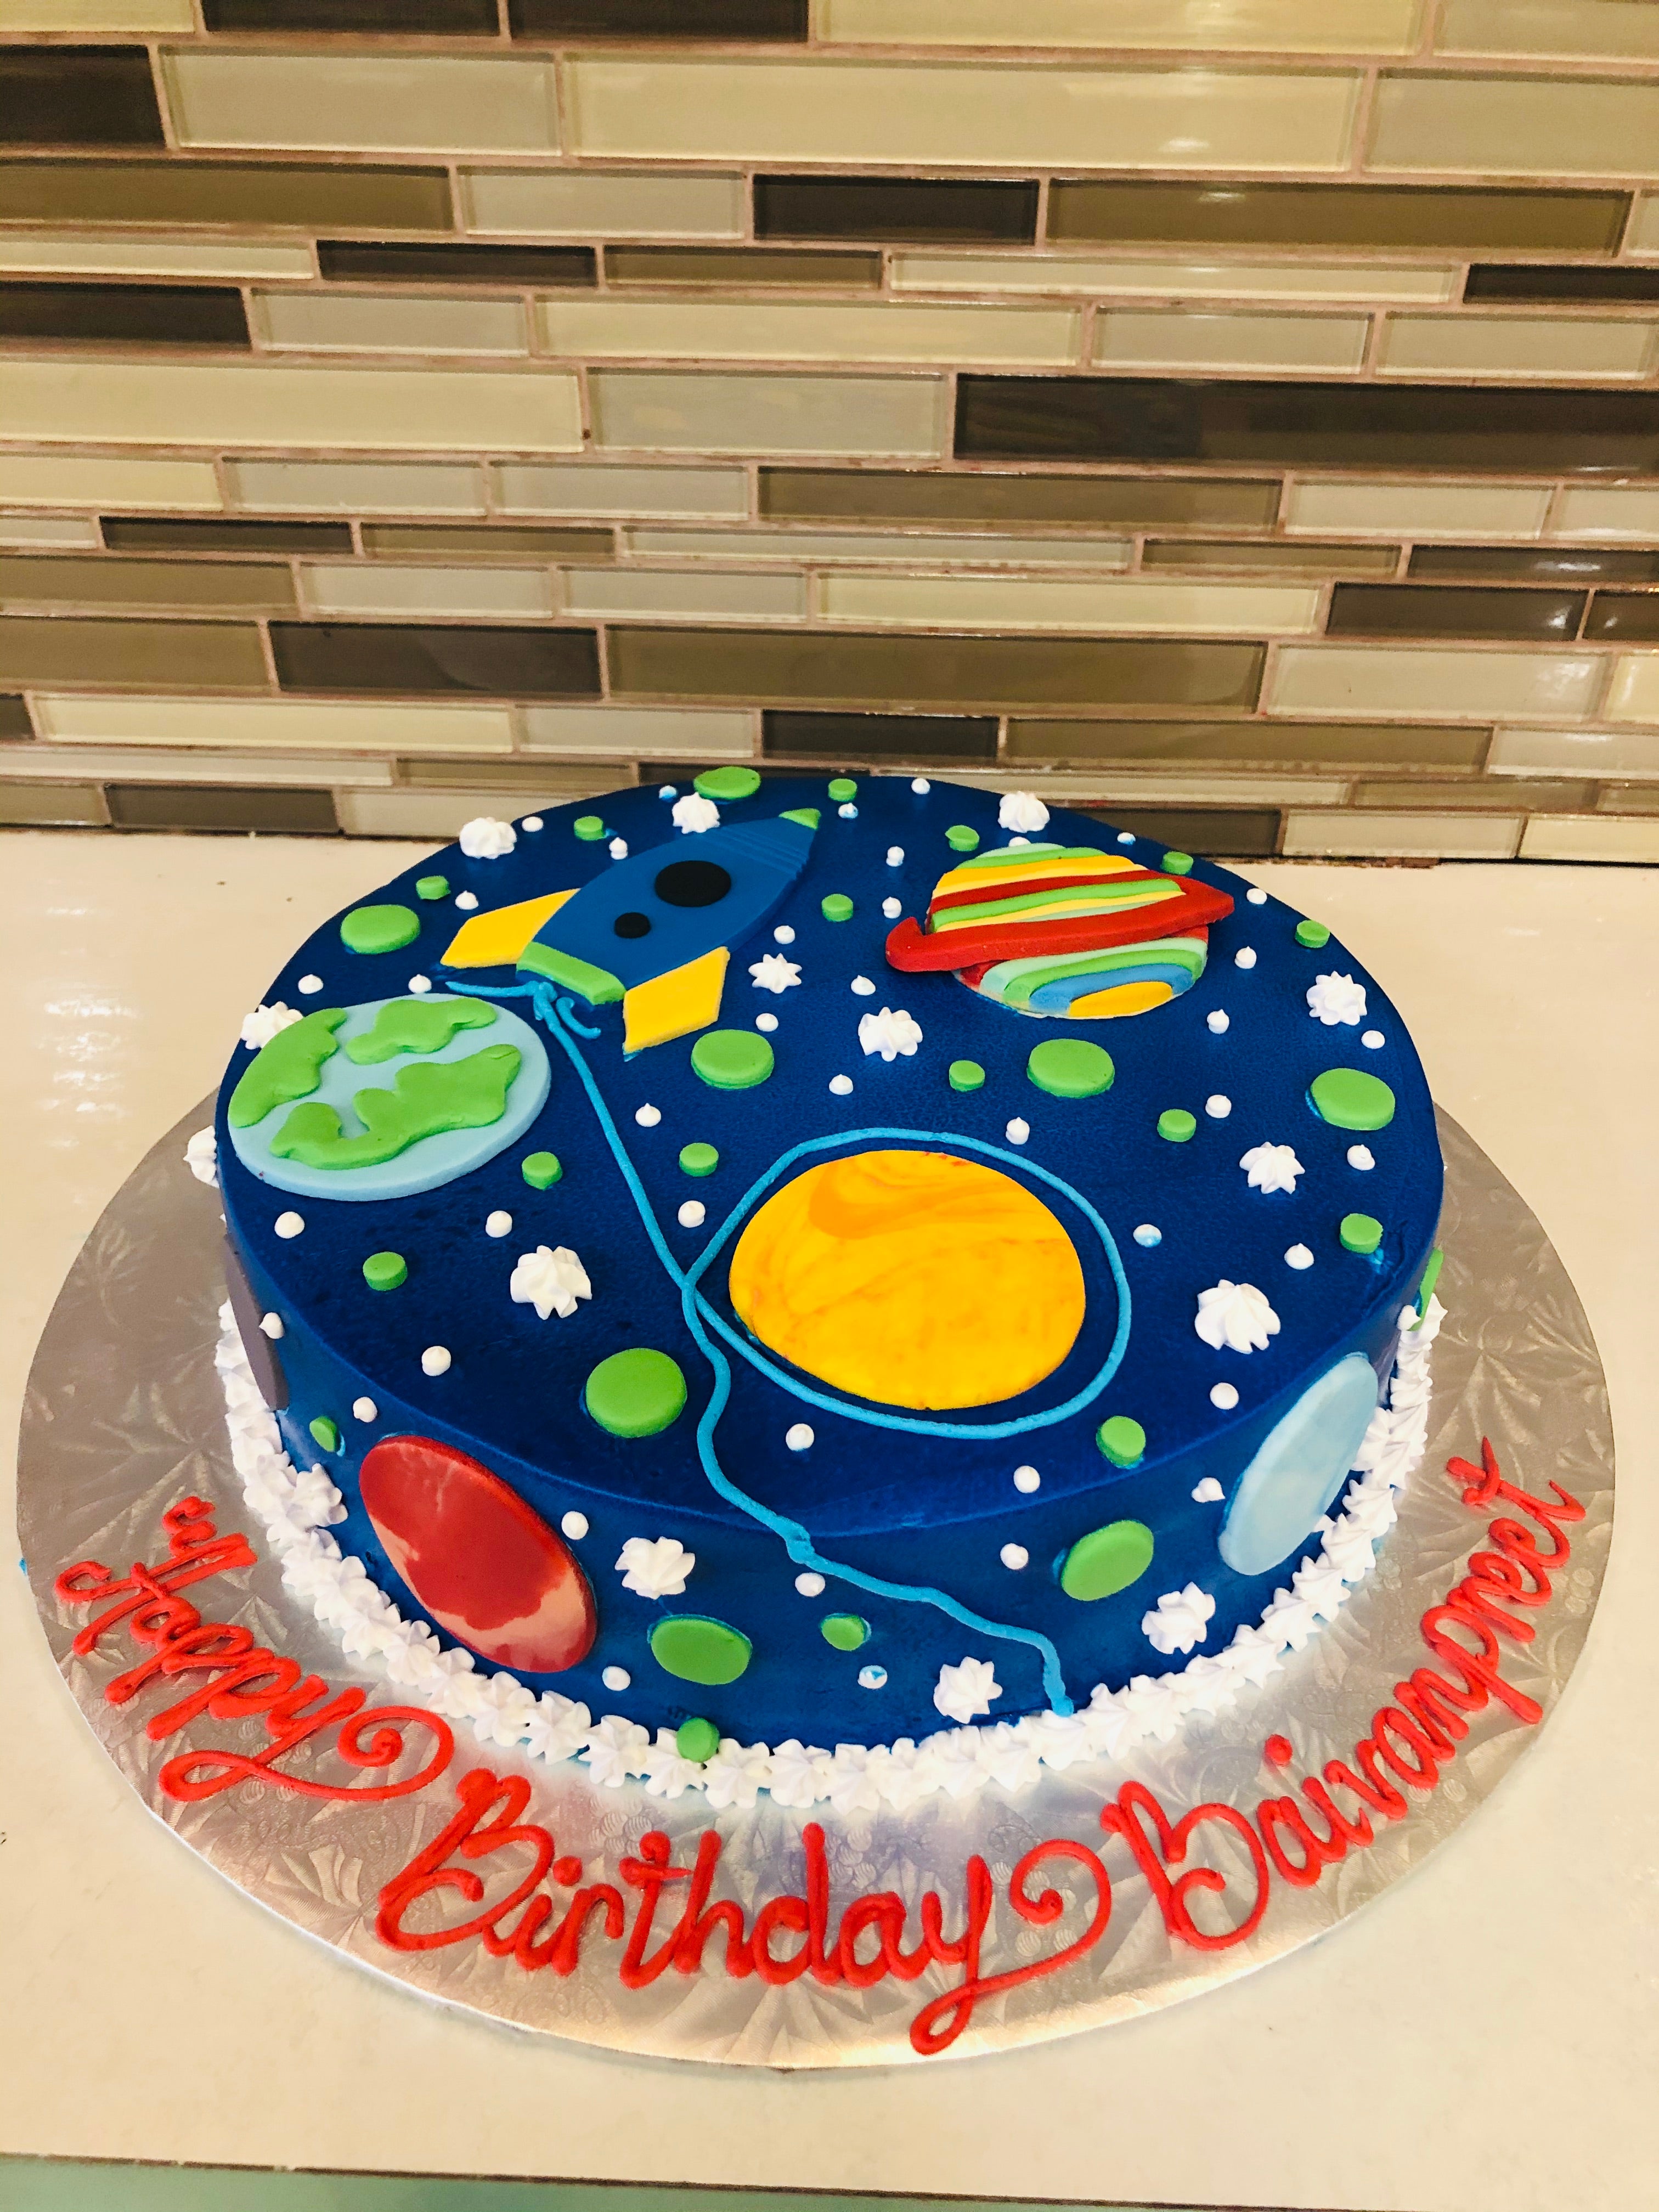 Just Baked by Kristina Noel - The Galaxy and planet Cake and Cupcakes  Happiest Birthday Jacob🚀🌞🪐🌚🌌🌠⭐🌕 | Facebook